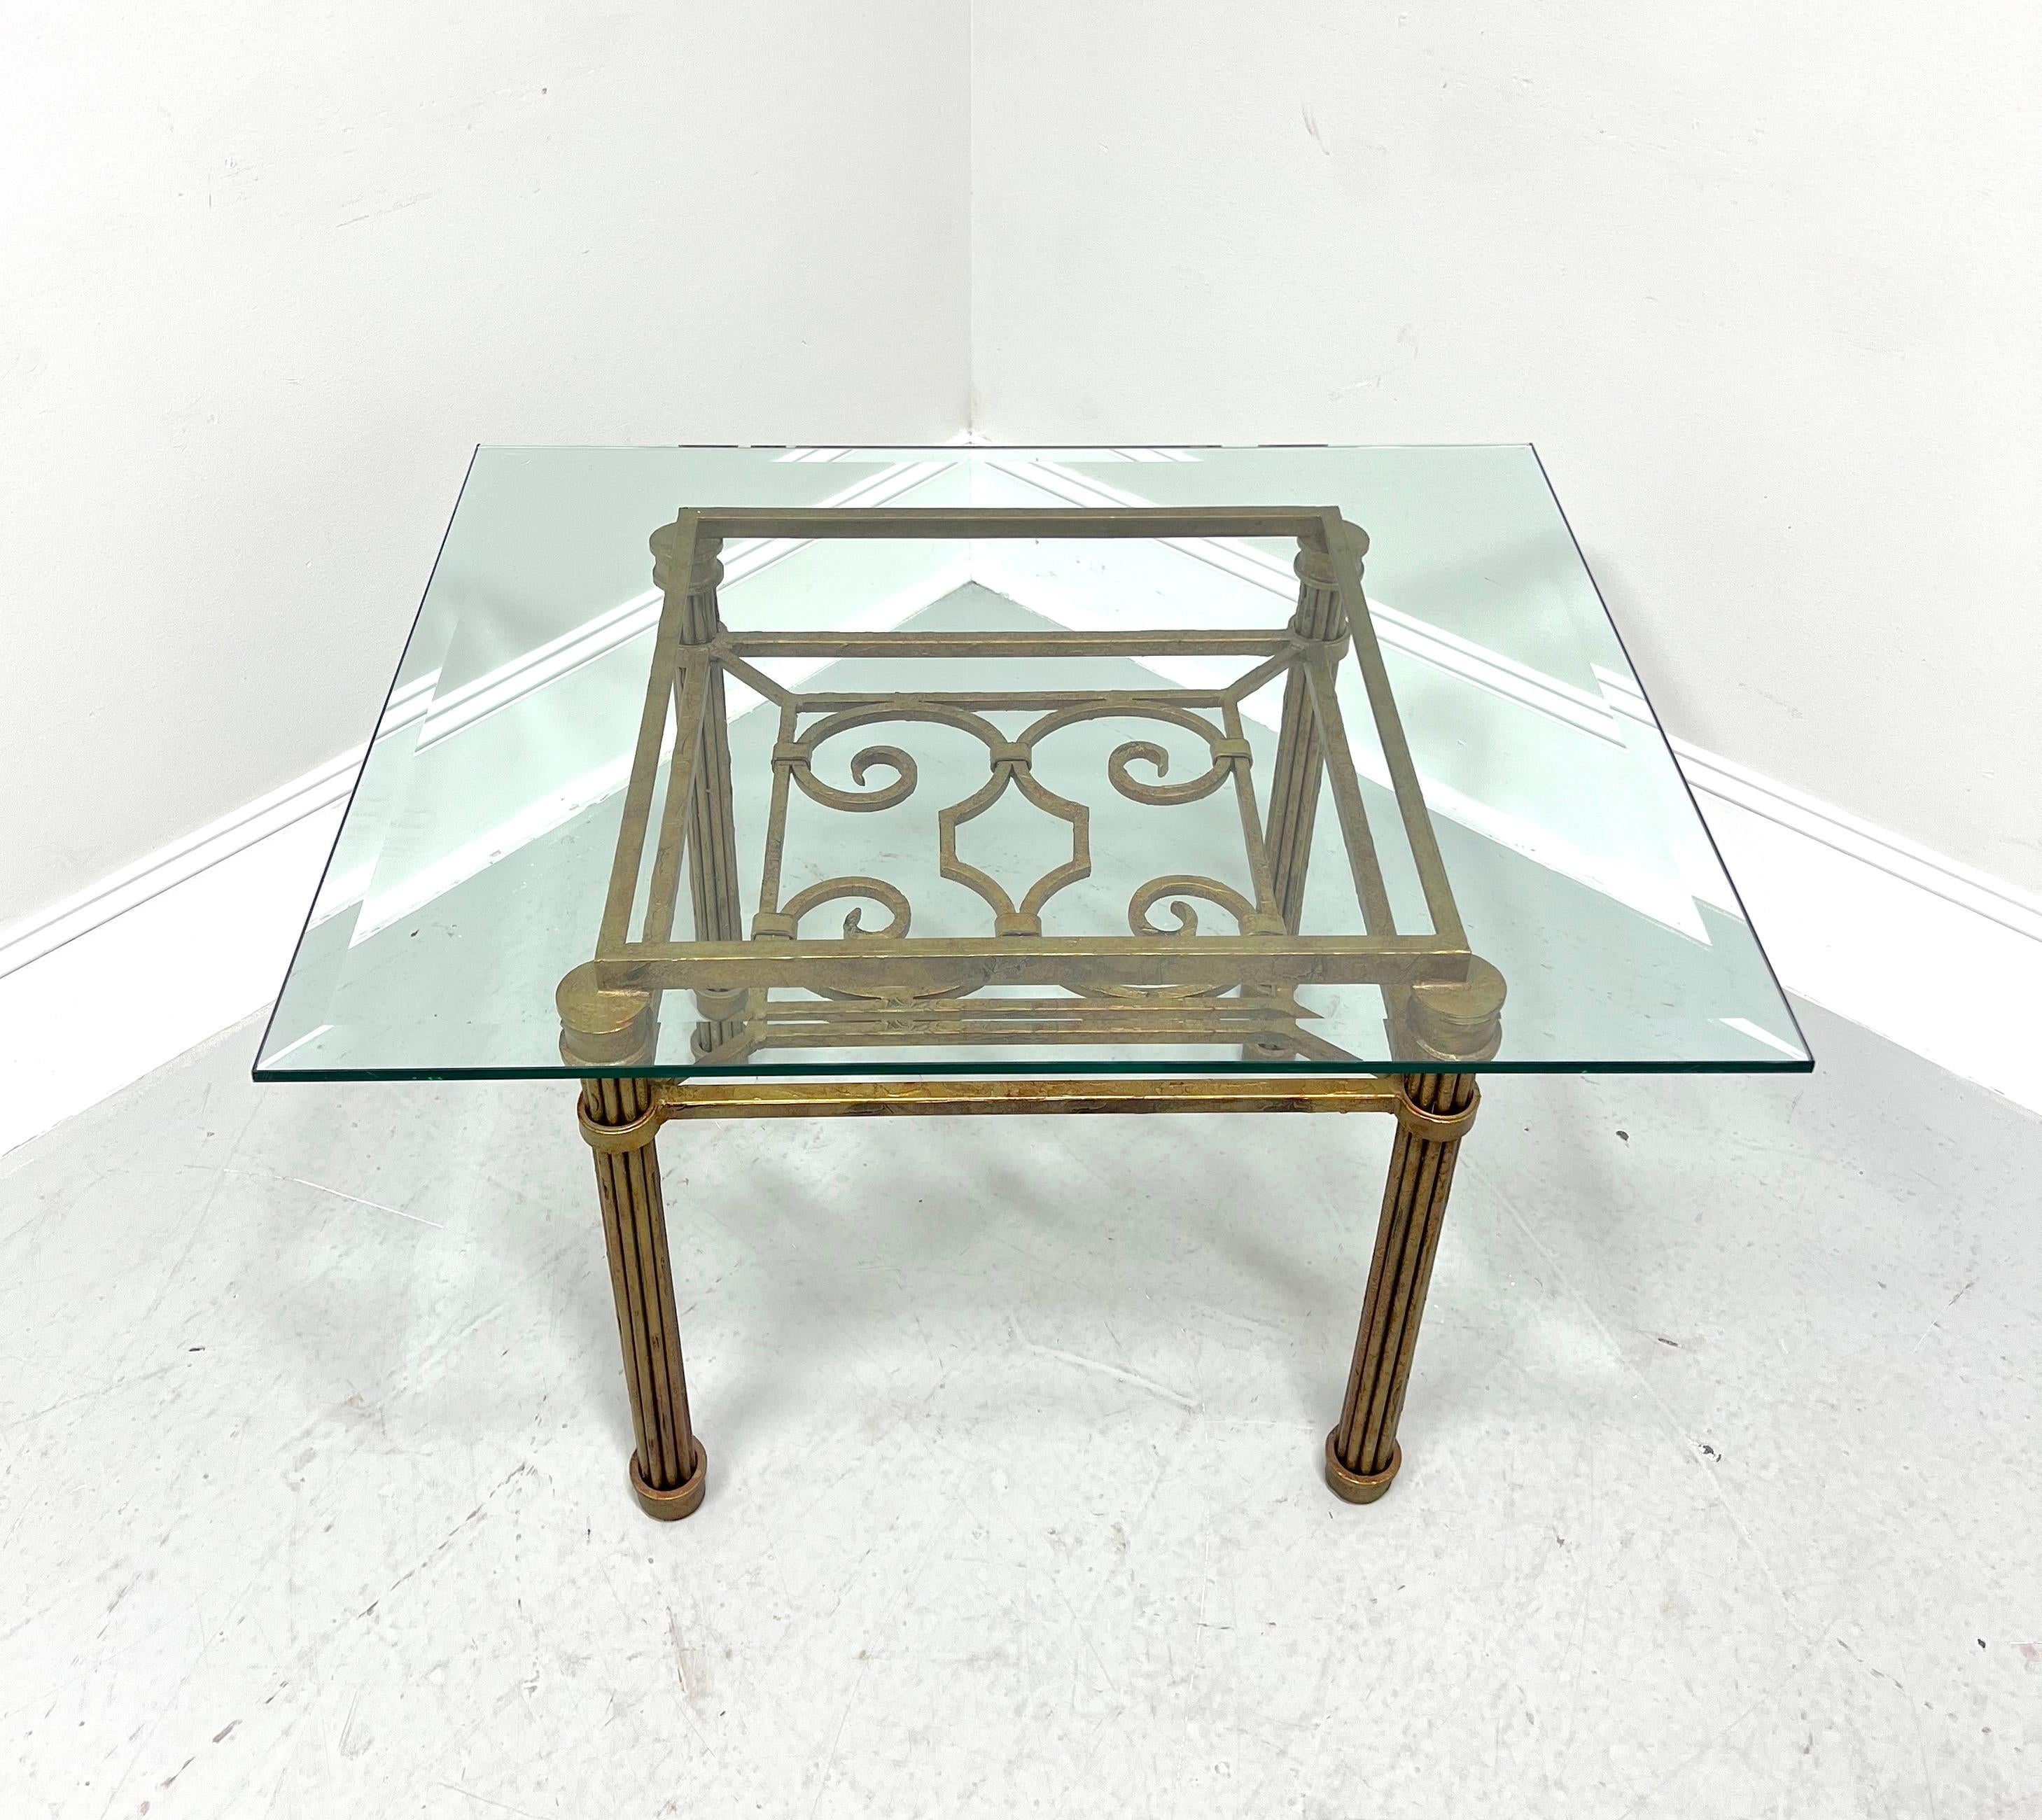 A Contemporary style glass top cocktail table, unbranded. Heavily constructed distressed cast metal base in a square shape, an open decoratively designed undertier, fluted column-like legs, round cap feet, and a rectangular beveled edge glass top.